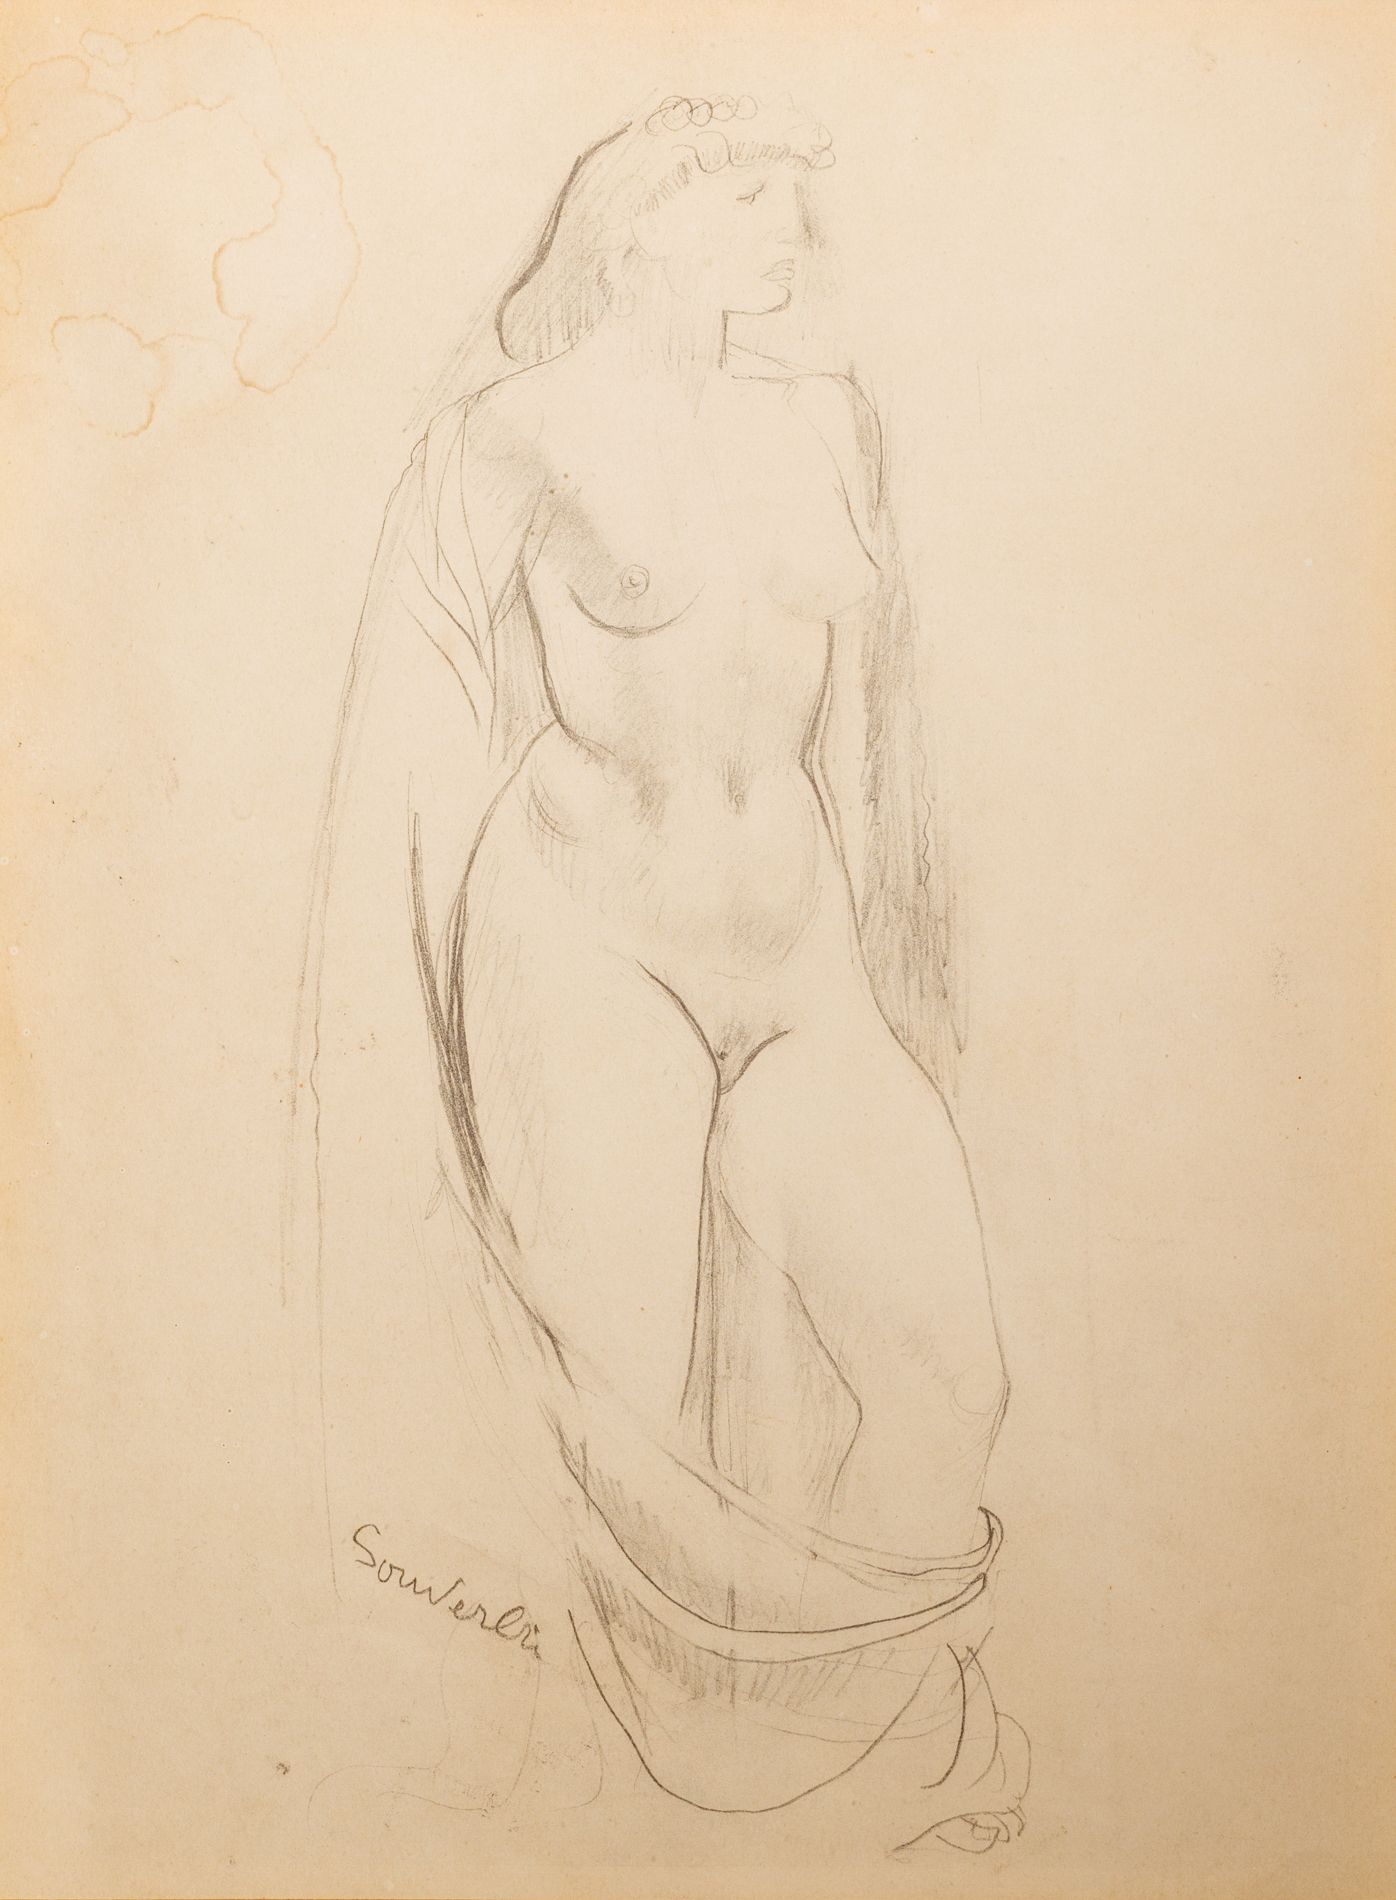 Null Jean SOUVERBIE (1891-1981)
Nude woman 
Pencil on paper 
Size: 29 x 22 cm (v&hellip;